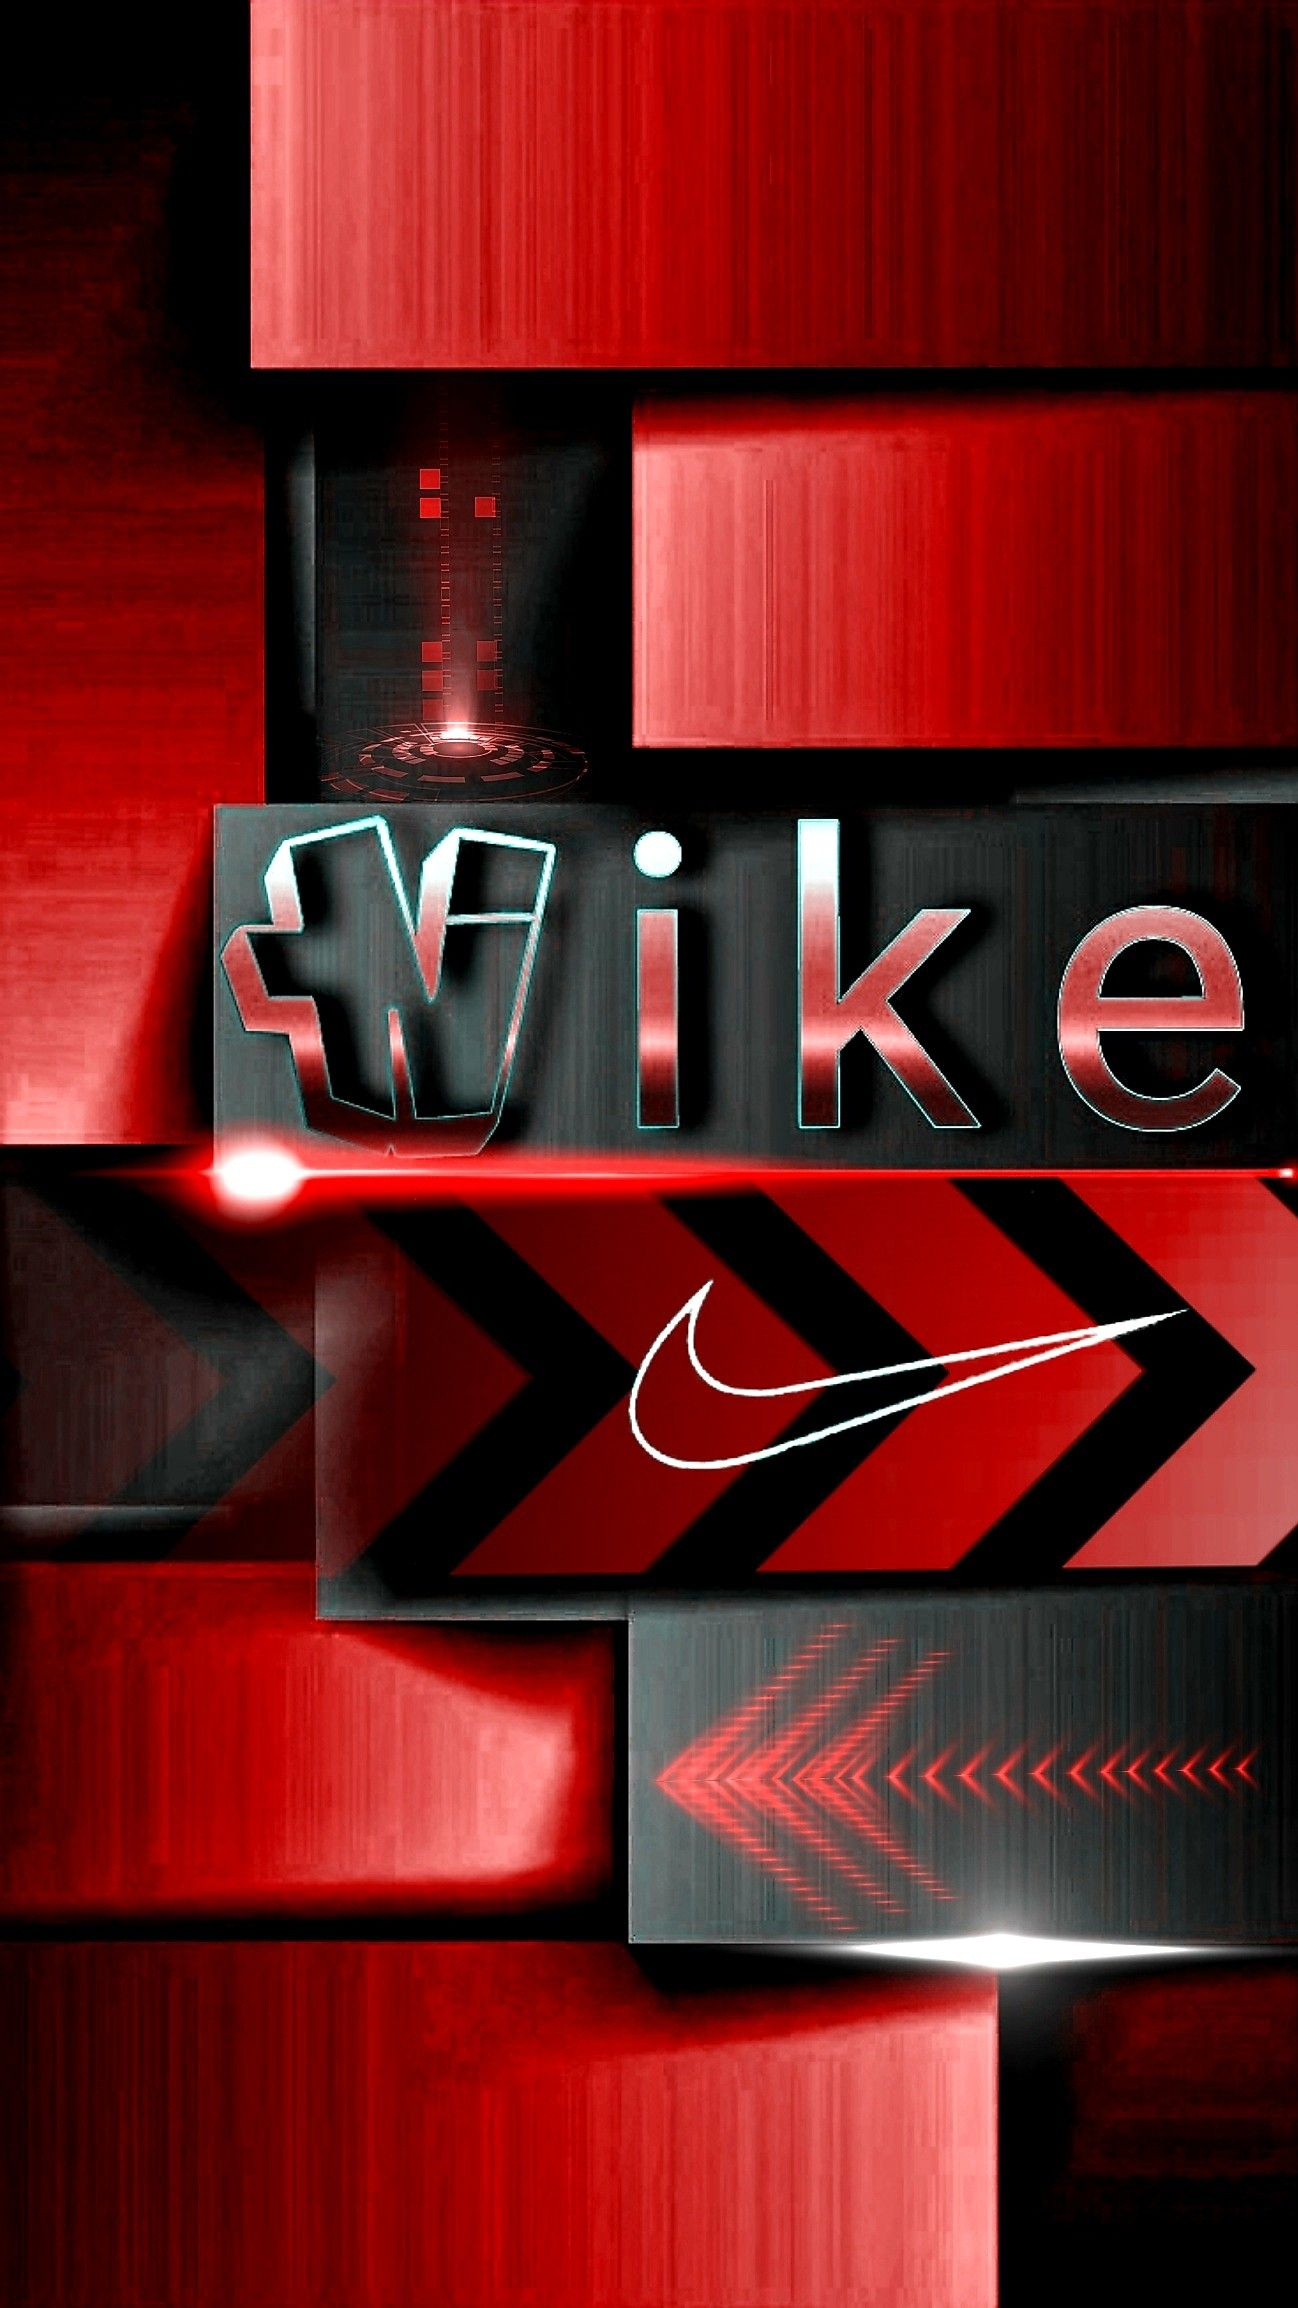 1298x2308 Pin by Hooter's Konceptz on Nike wallpaper | Nike wallpaper, Nike logo wallpapers, Jordan logo wallpaper